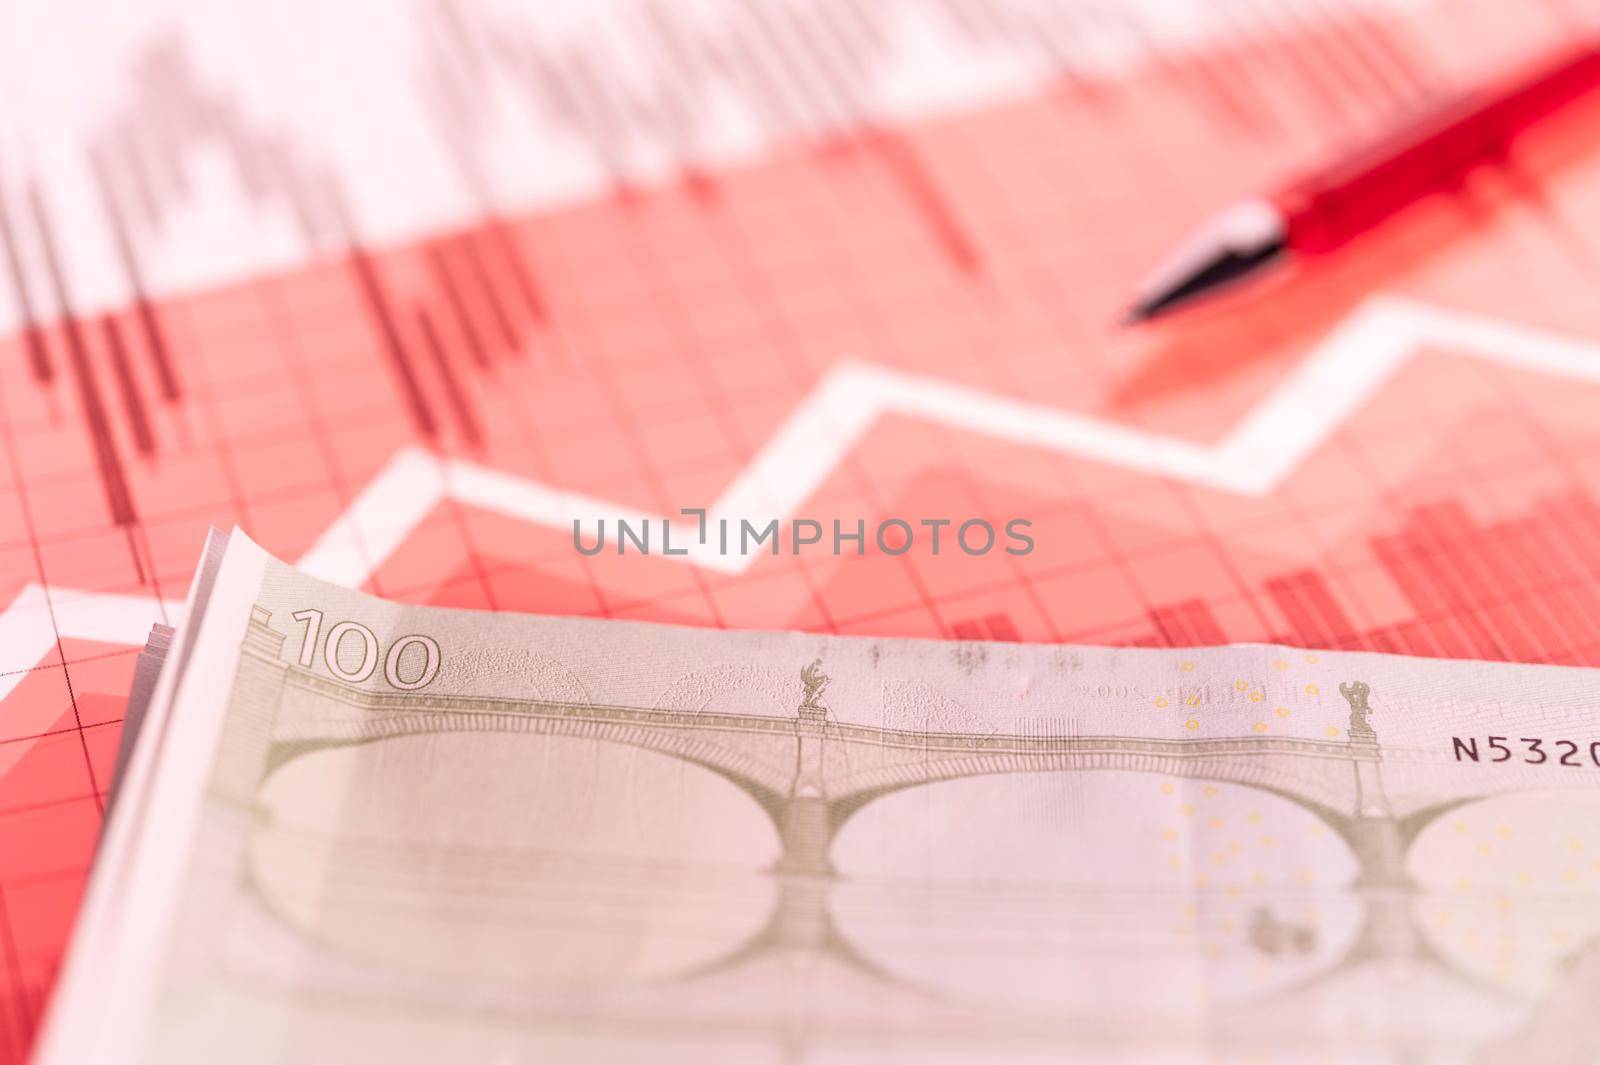 Finance background with money, stock market chart, graph and pen. Economy trends background for business idea and all art work design. Abstract finance and business concept. Living coral toned.